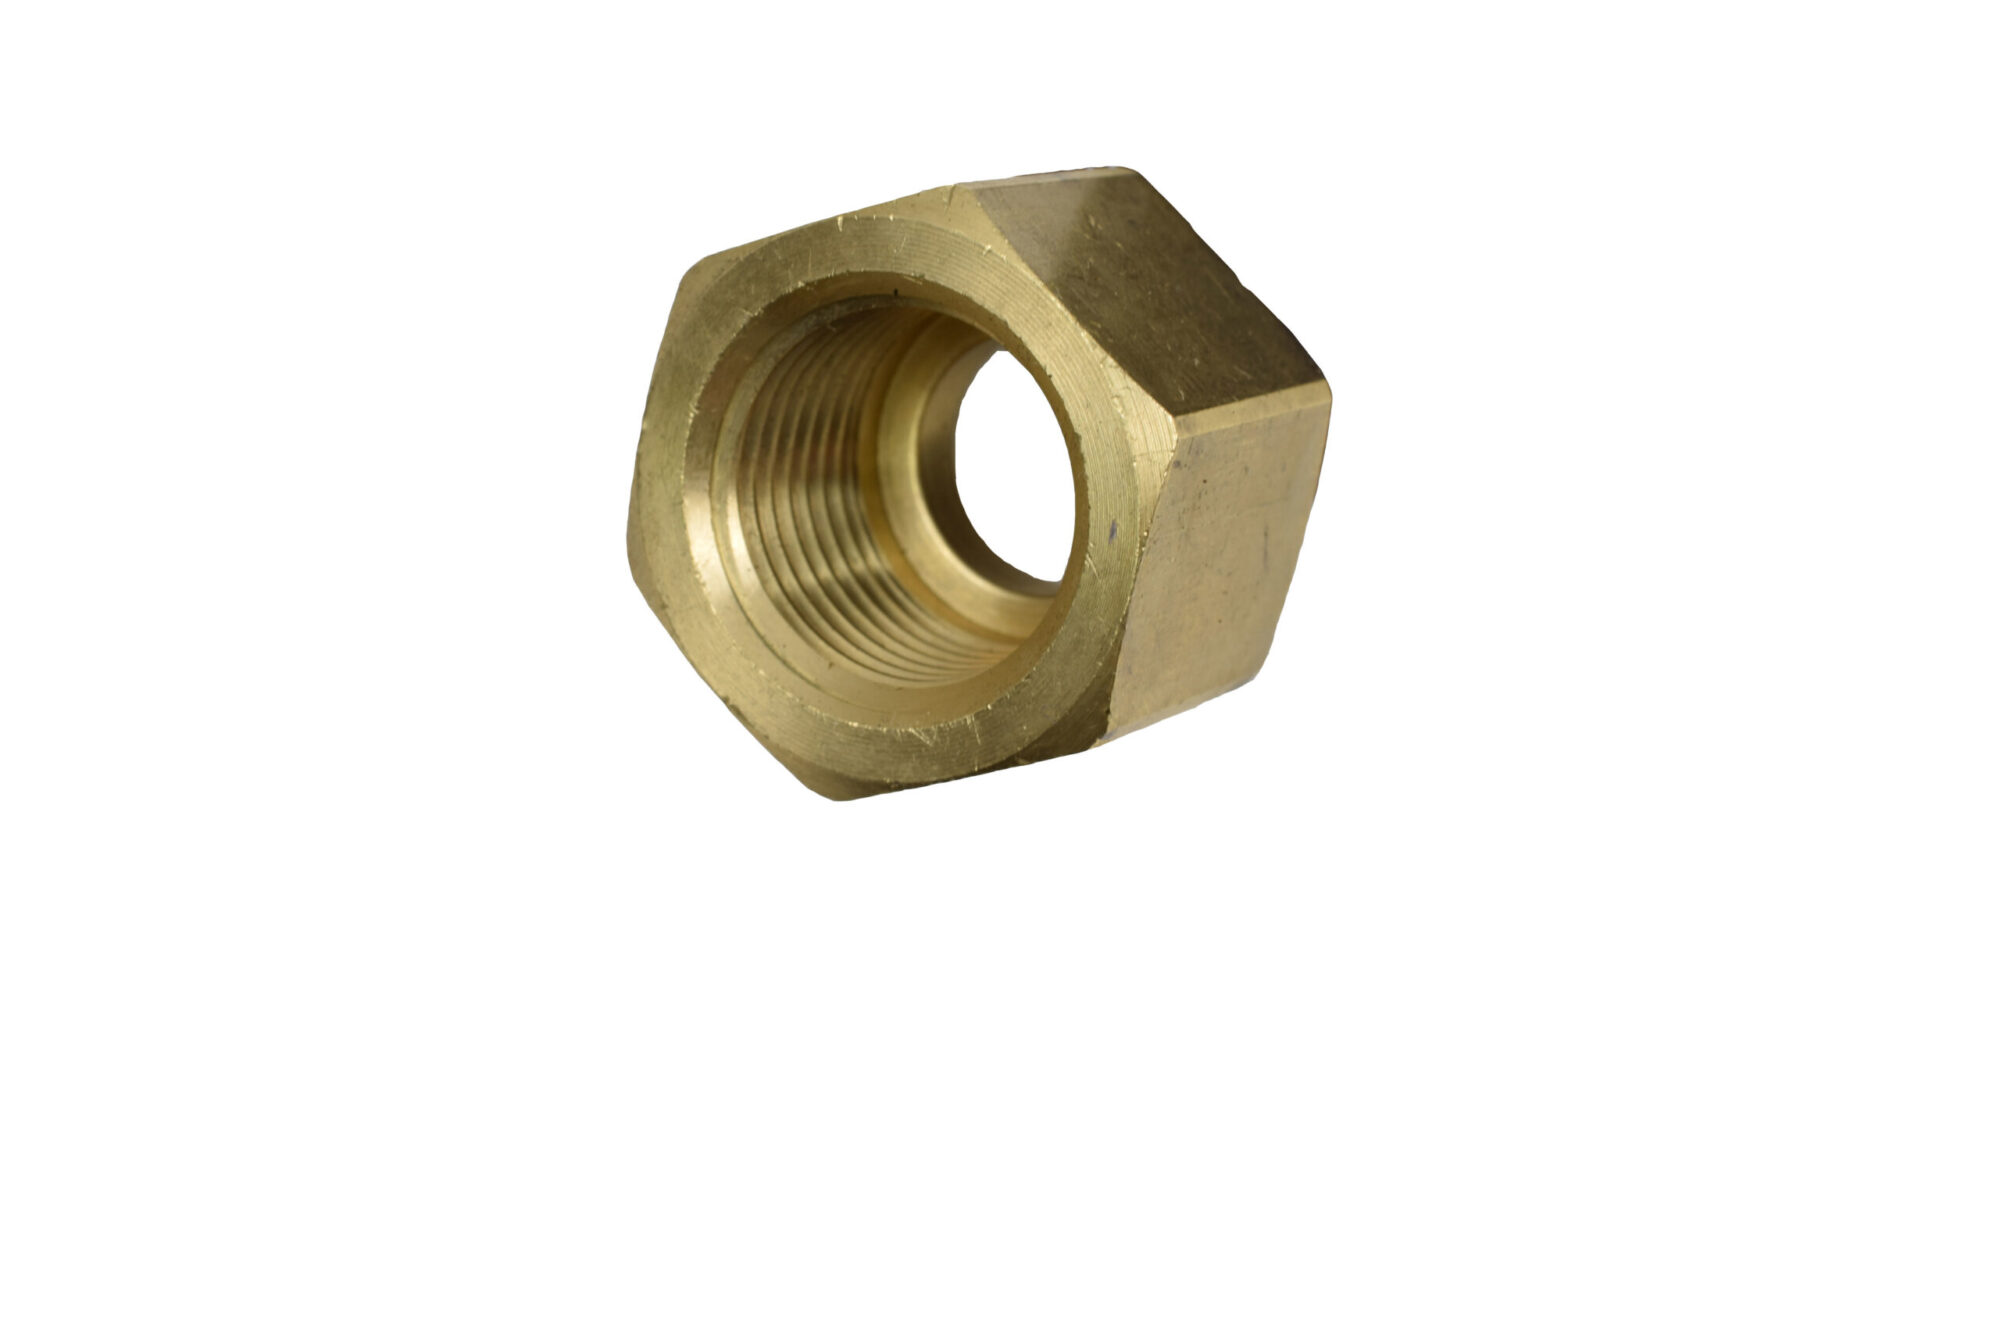 CO52 Nut for a Primary CO2 Stem